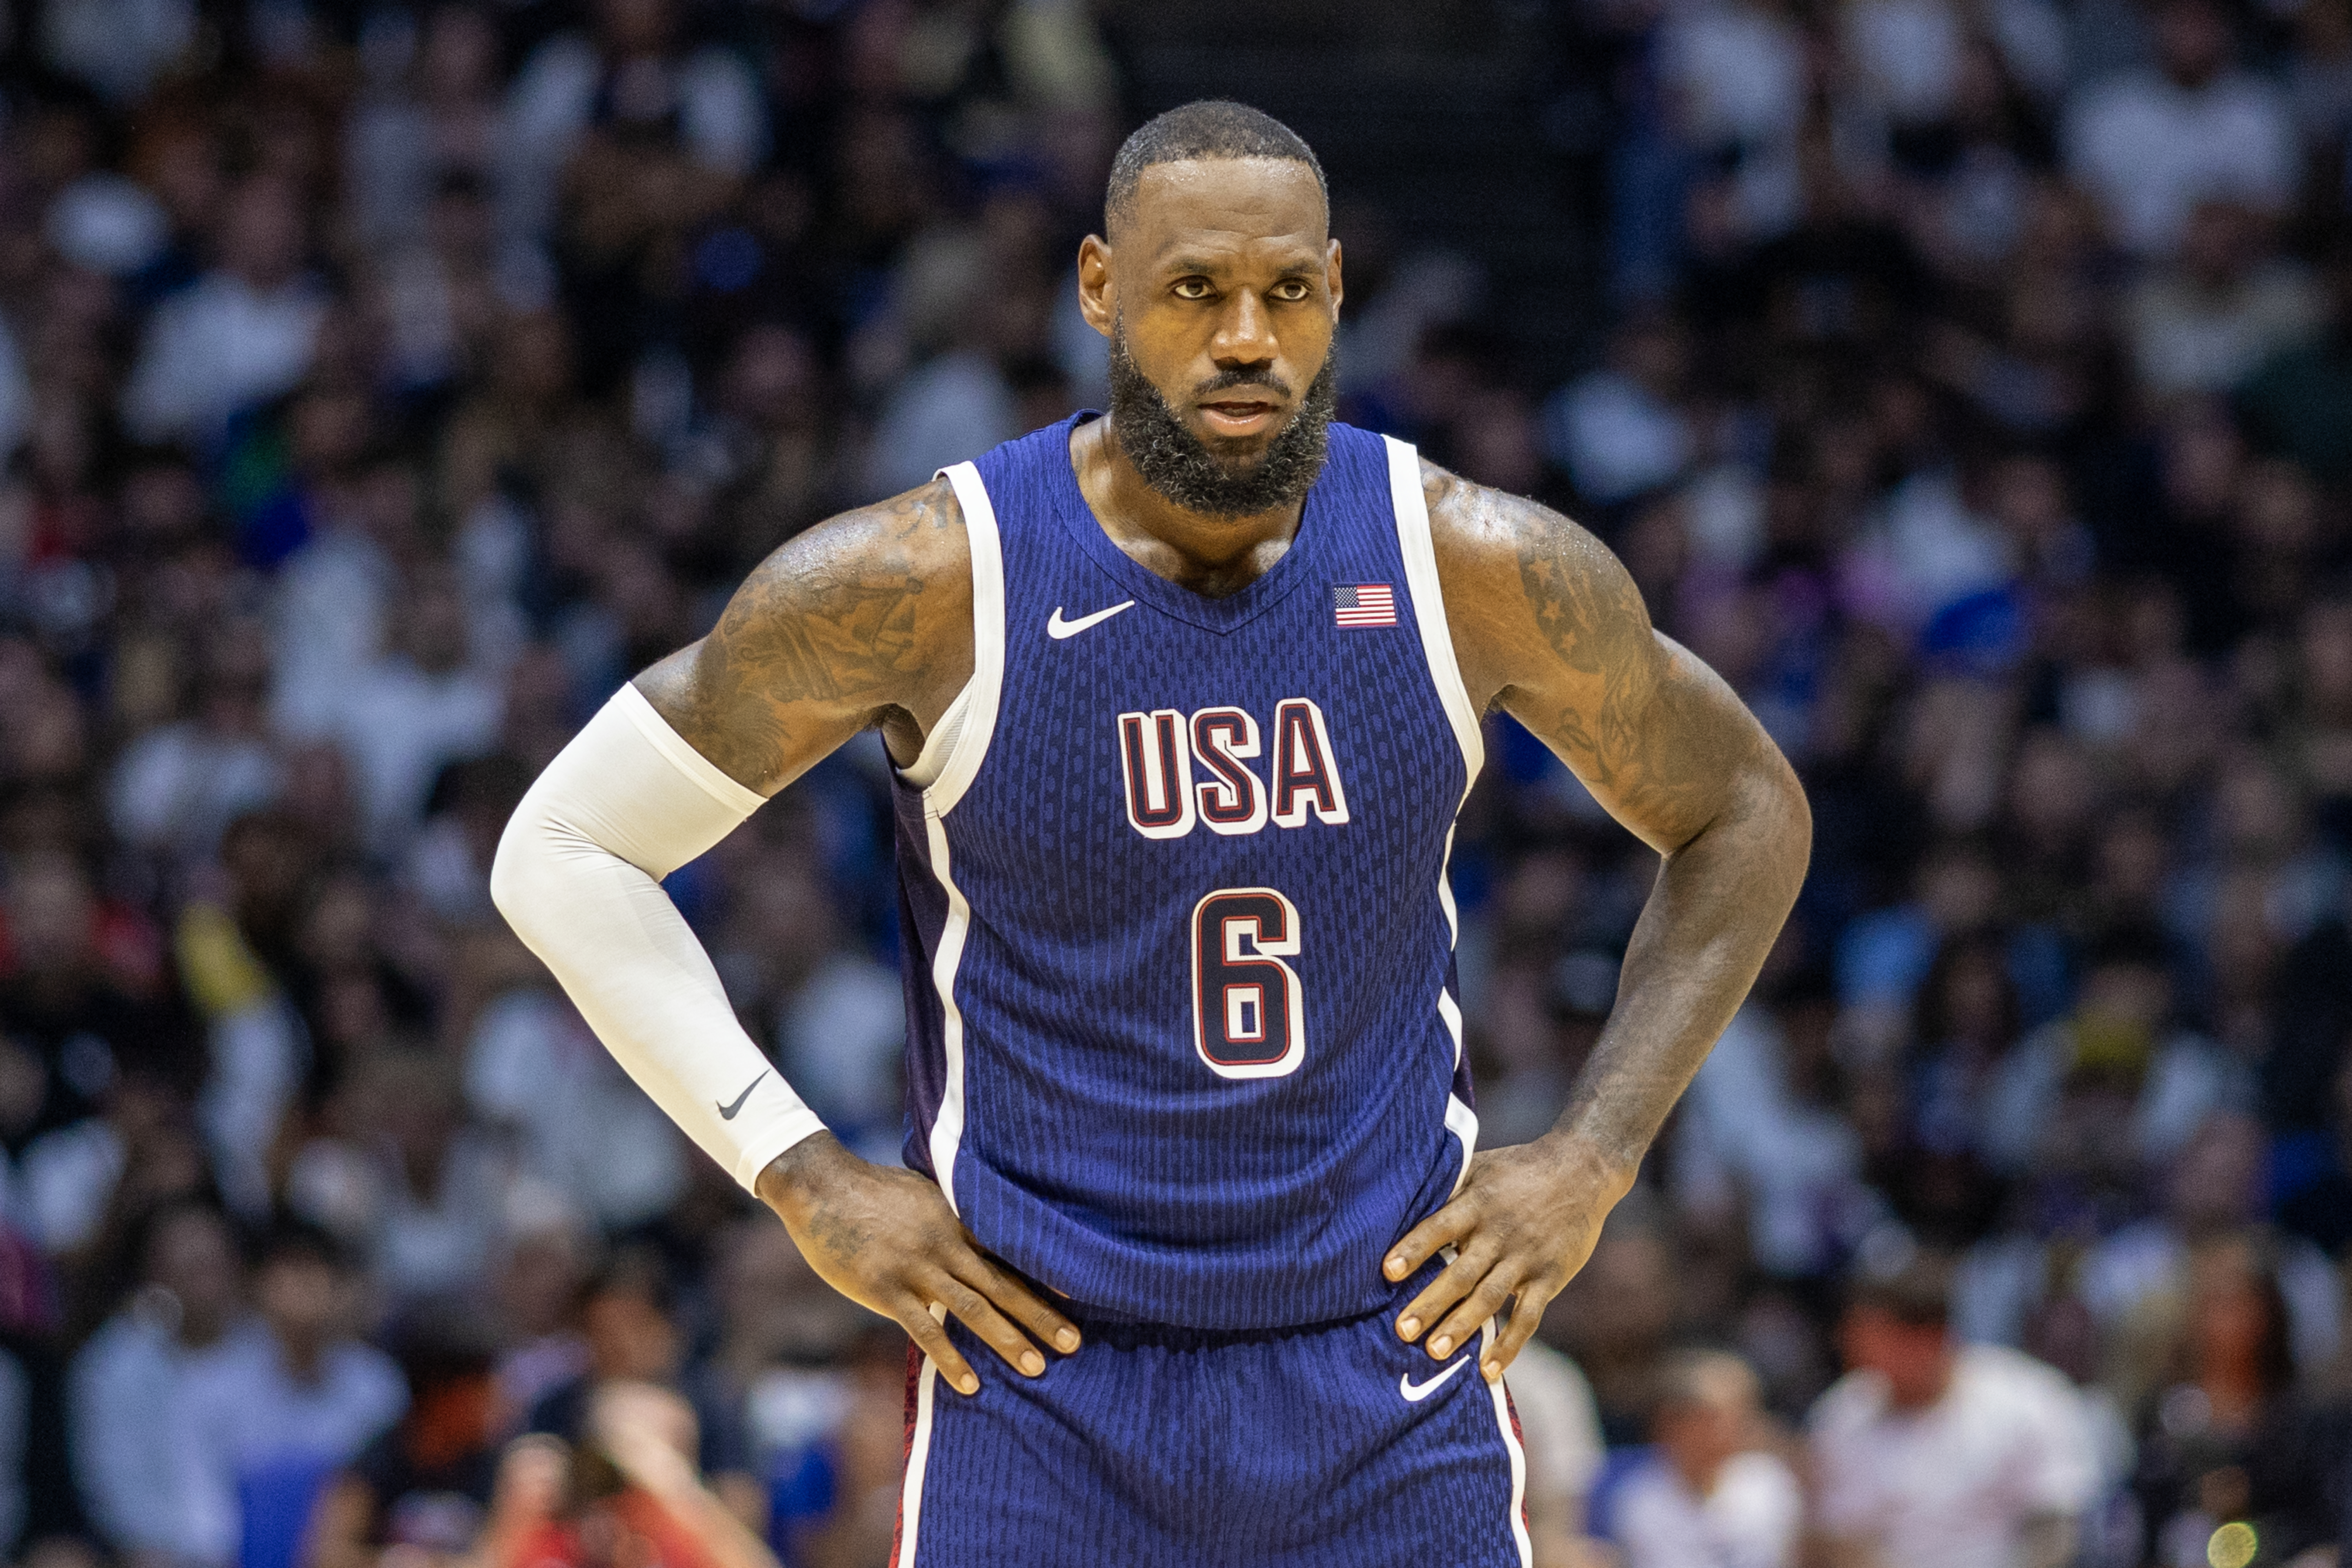 Team USA avoids stunning loss to South Sudan with LeBron's last-minute basket